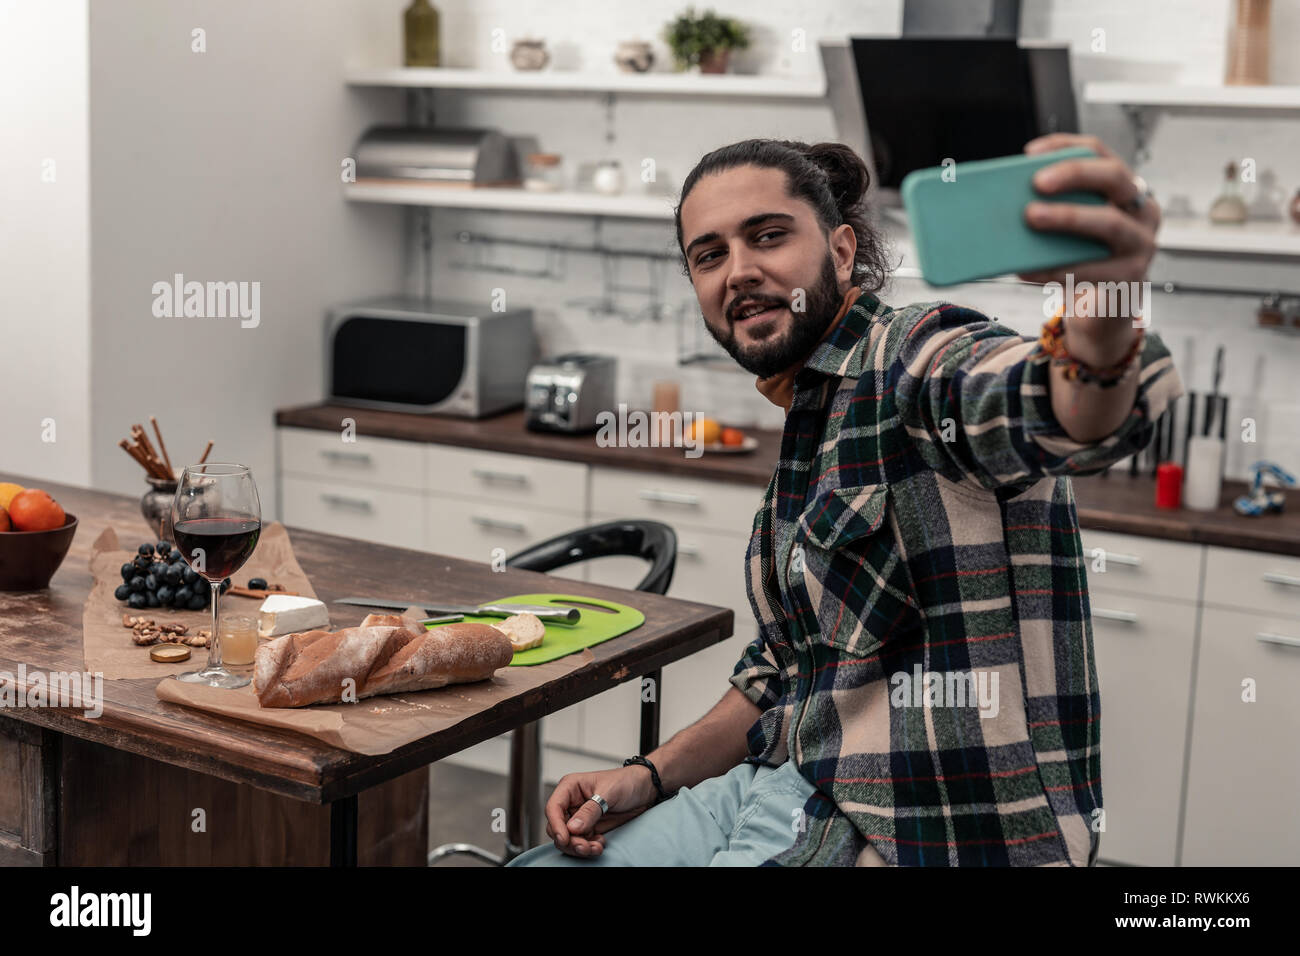 Positive cheerful man taking selfies in the kitchen Stock Photo